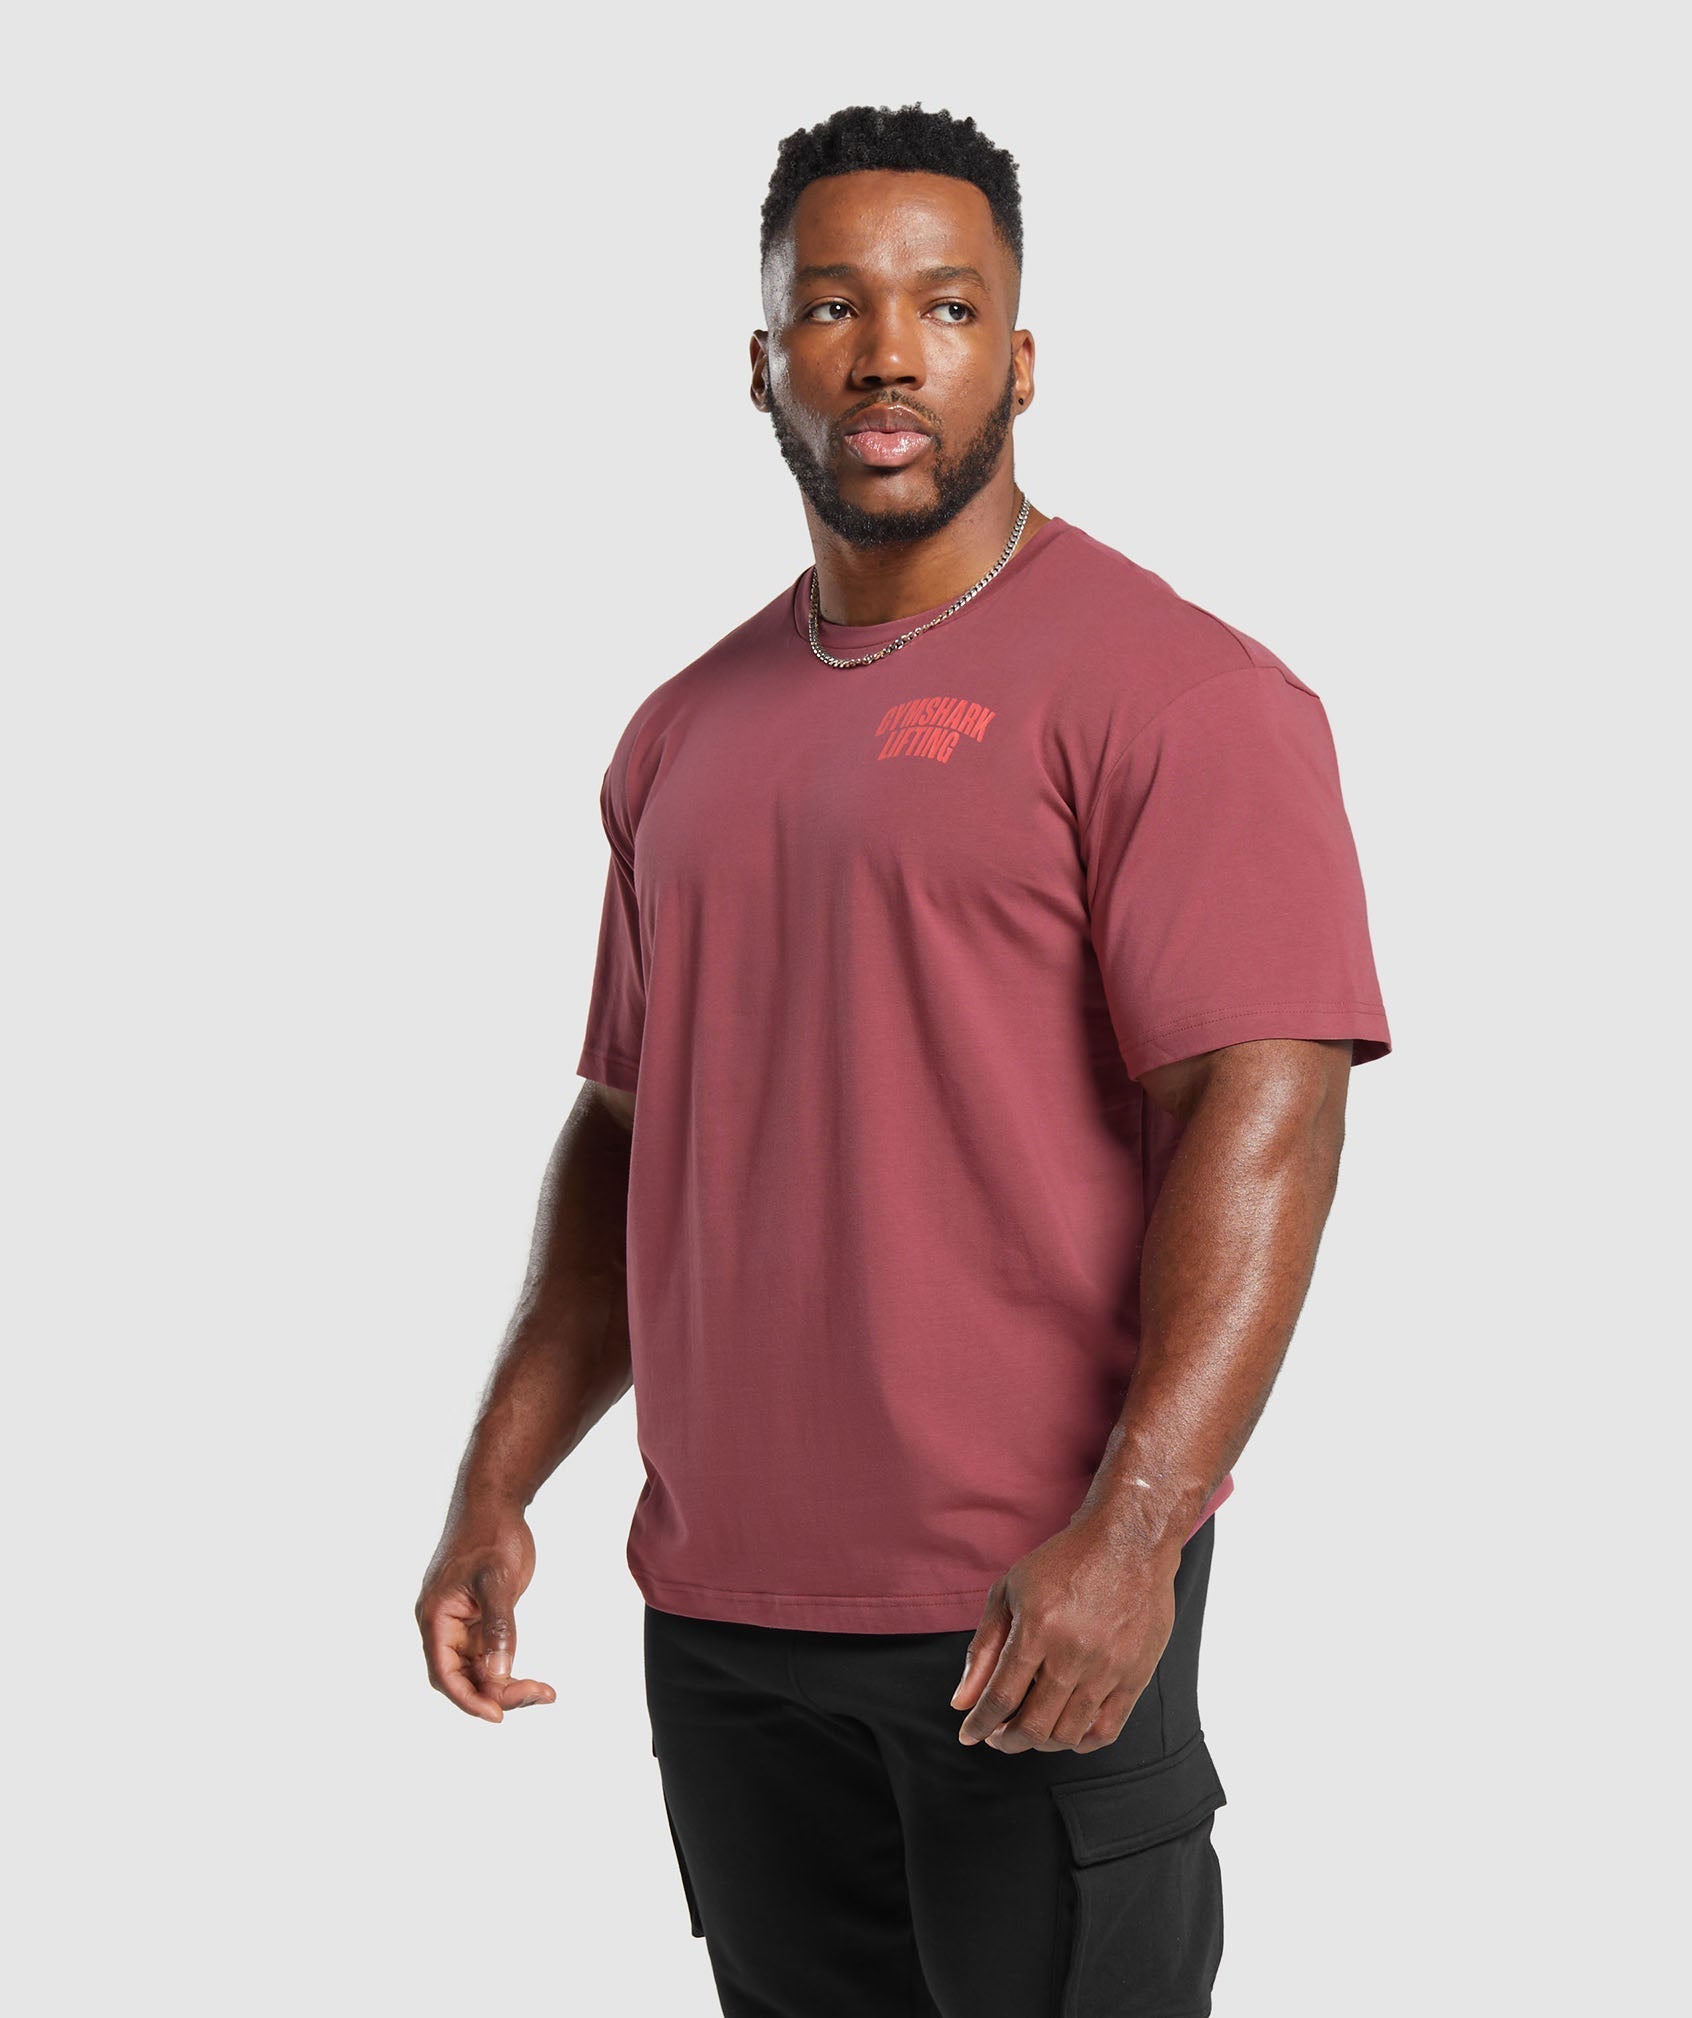 Lifting T-Shirt in Soft Berry - view 3